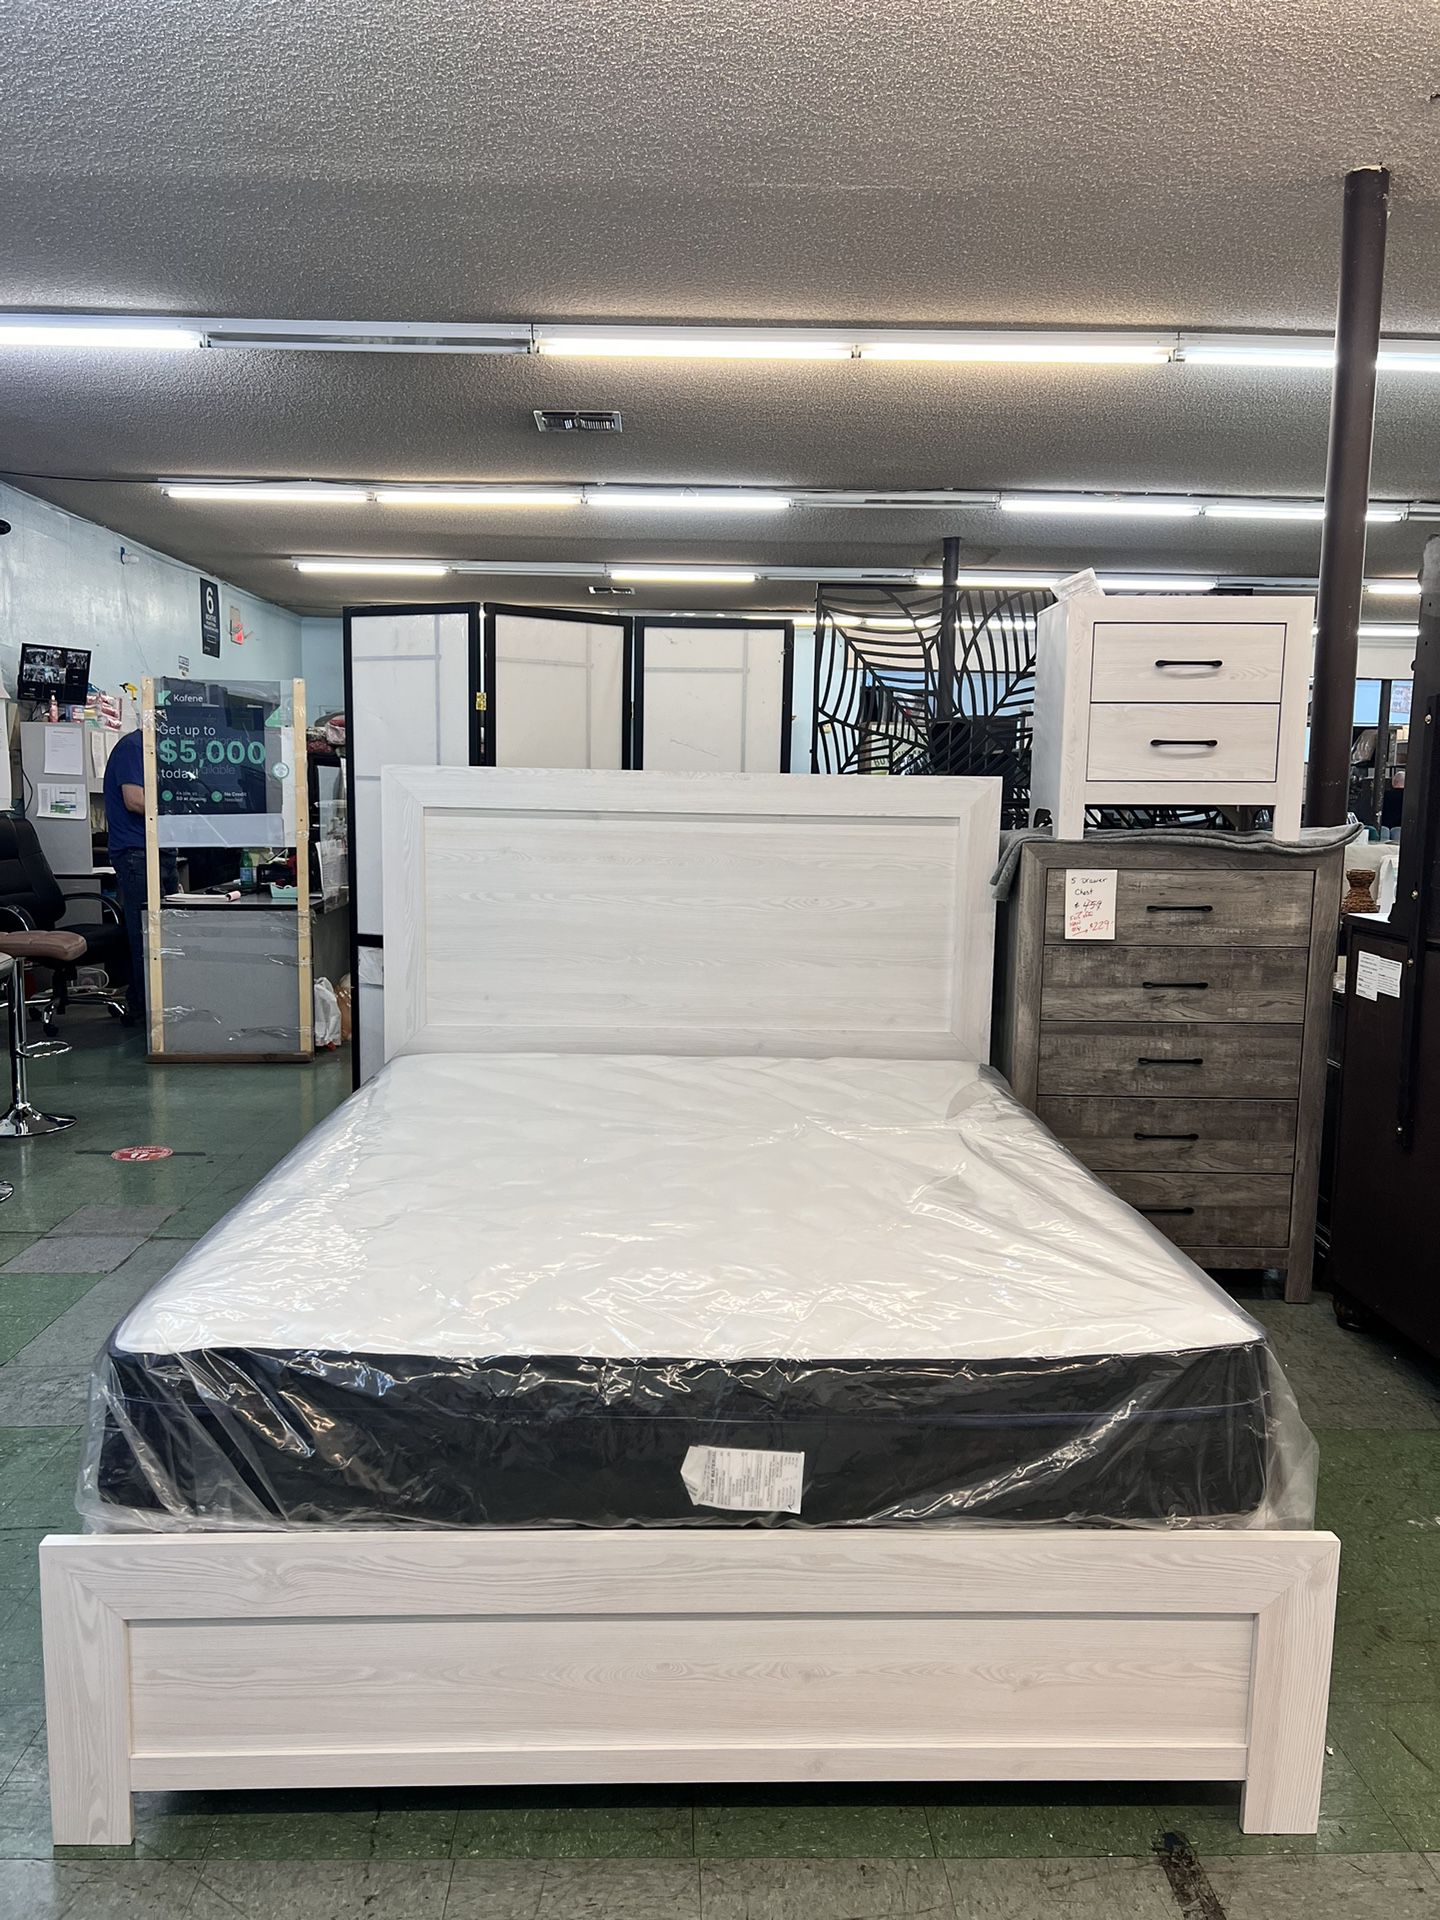 ⚡️Flash Deal⚡️Brand New Queen Bed Frame $229, Delivery Available 